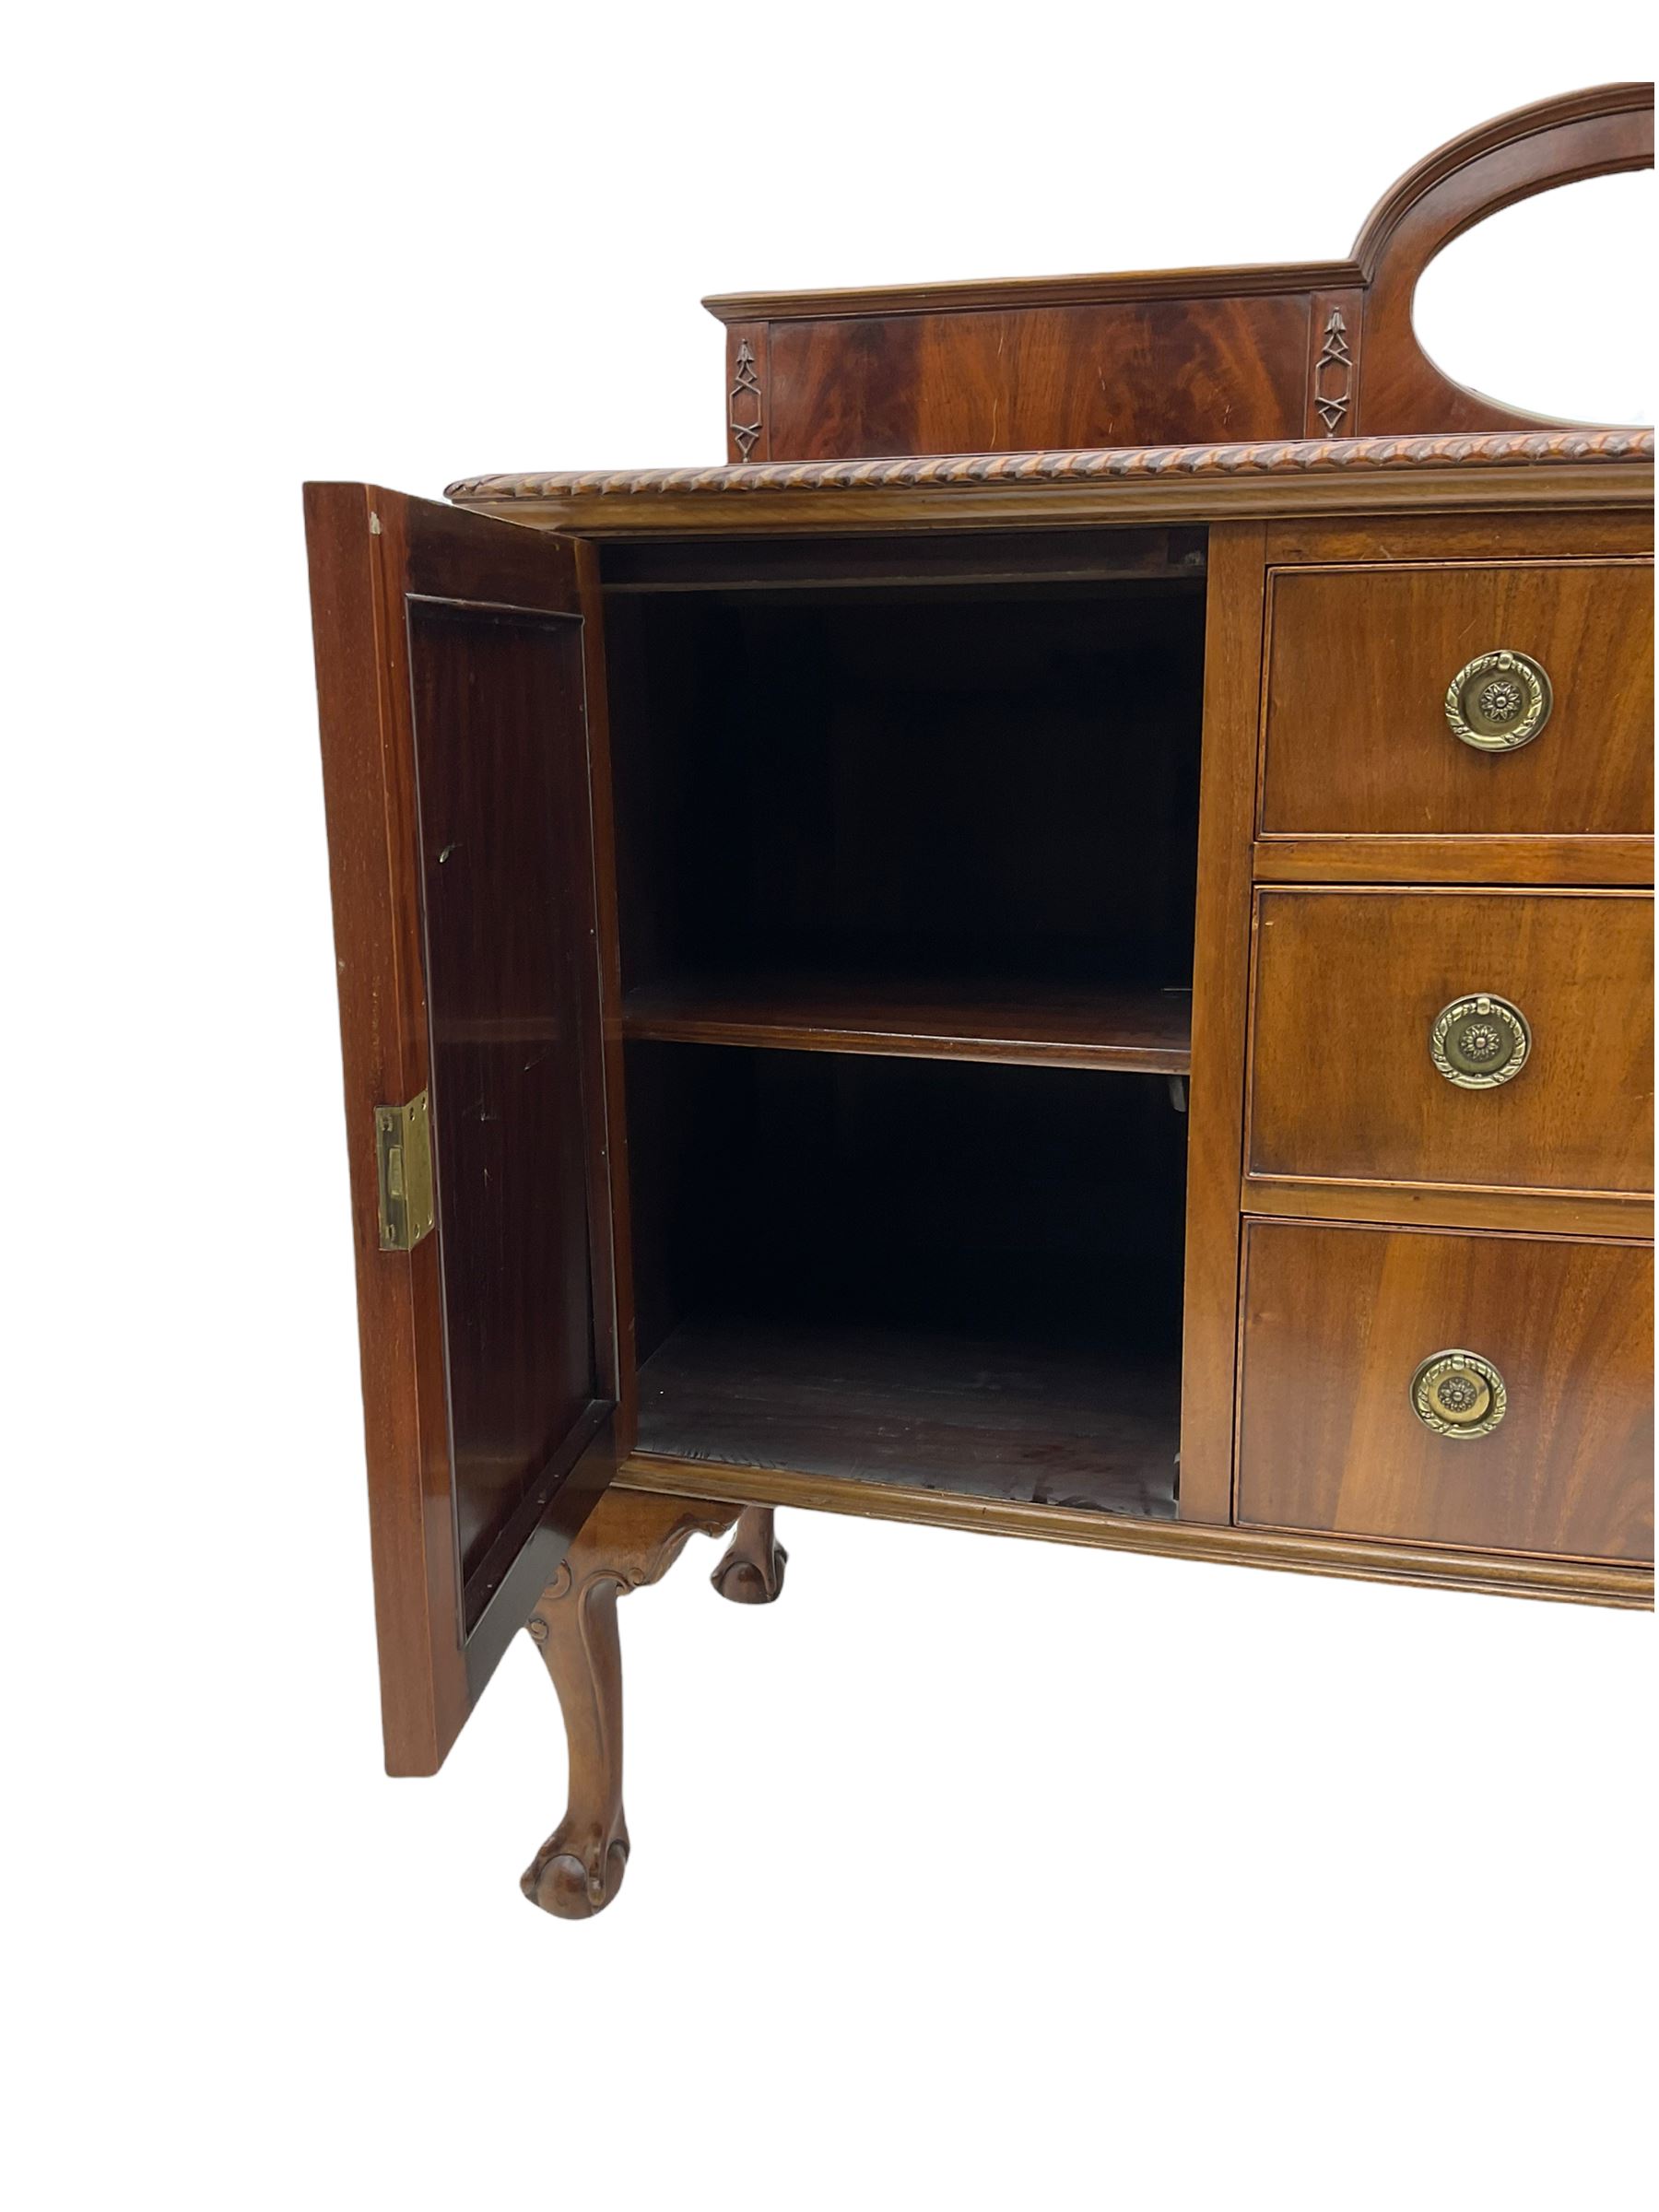 Early 20th century mahogany bow-fronted sideboard - Image 8 of 8